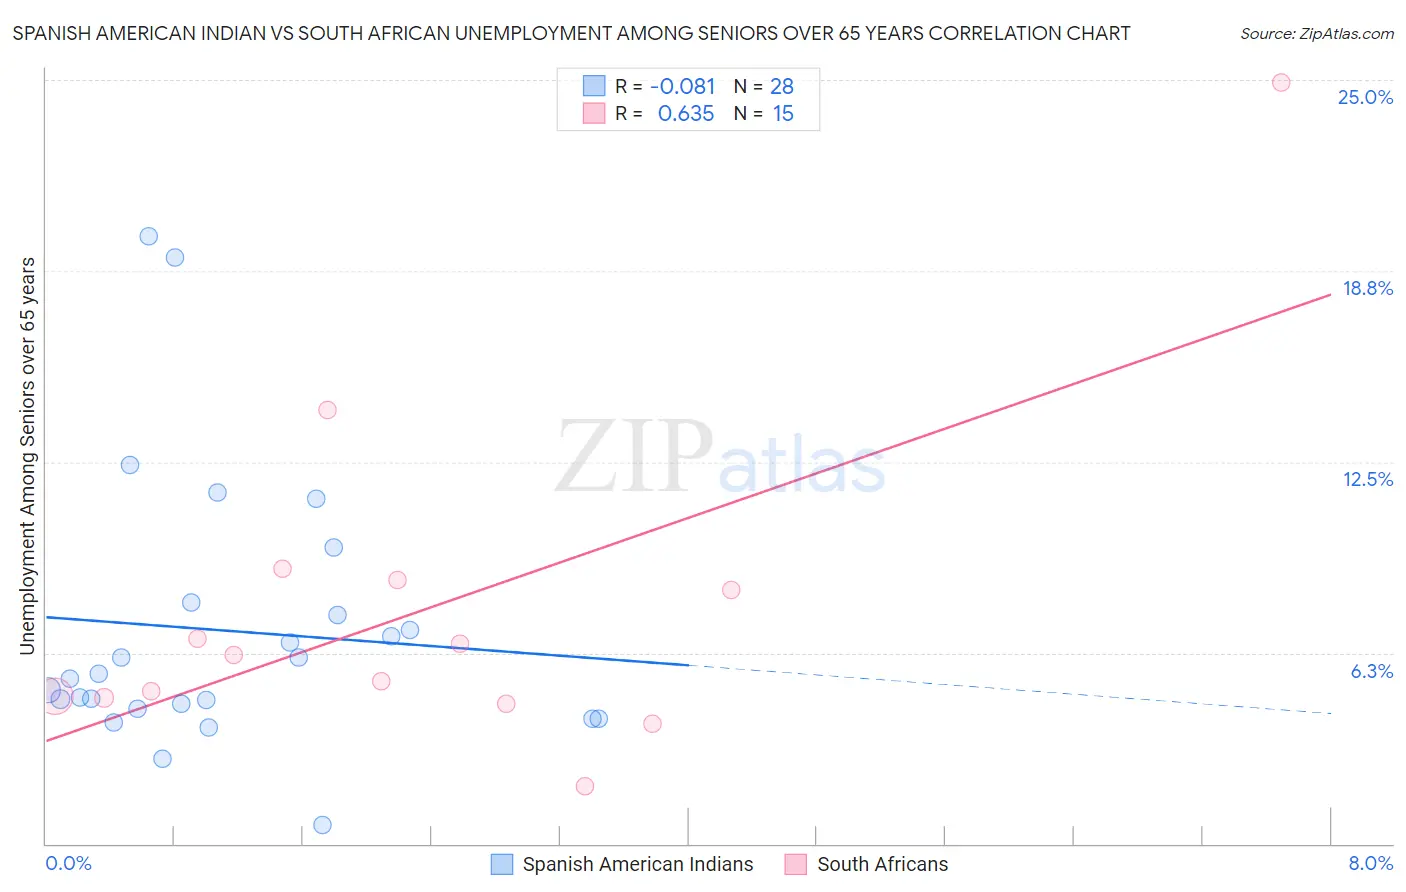 Spanish American Indian vs South African Unemployment Among Seniors over 65 years